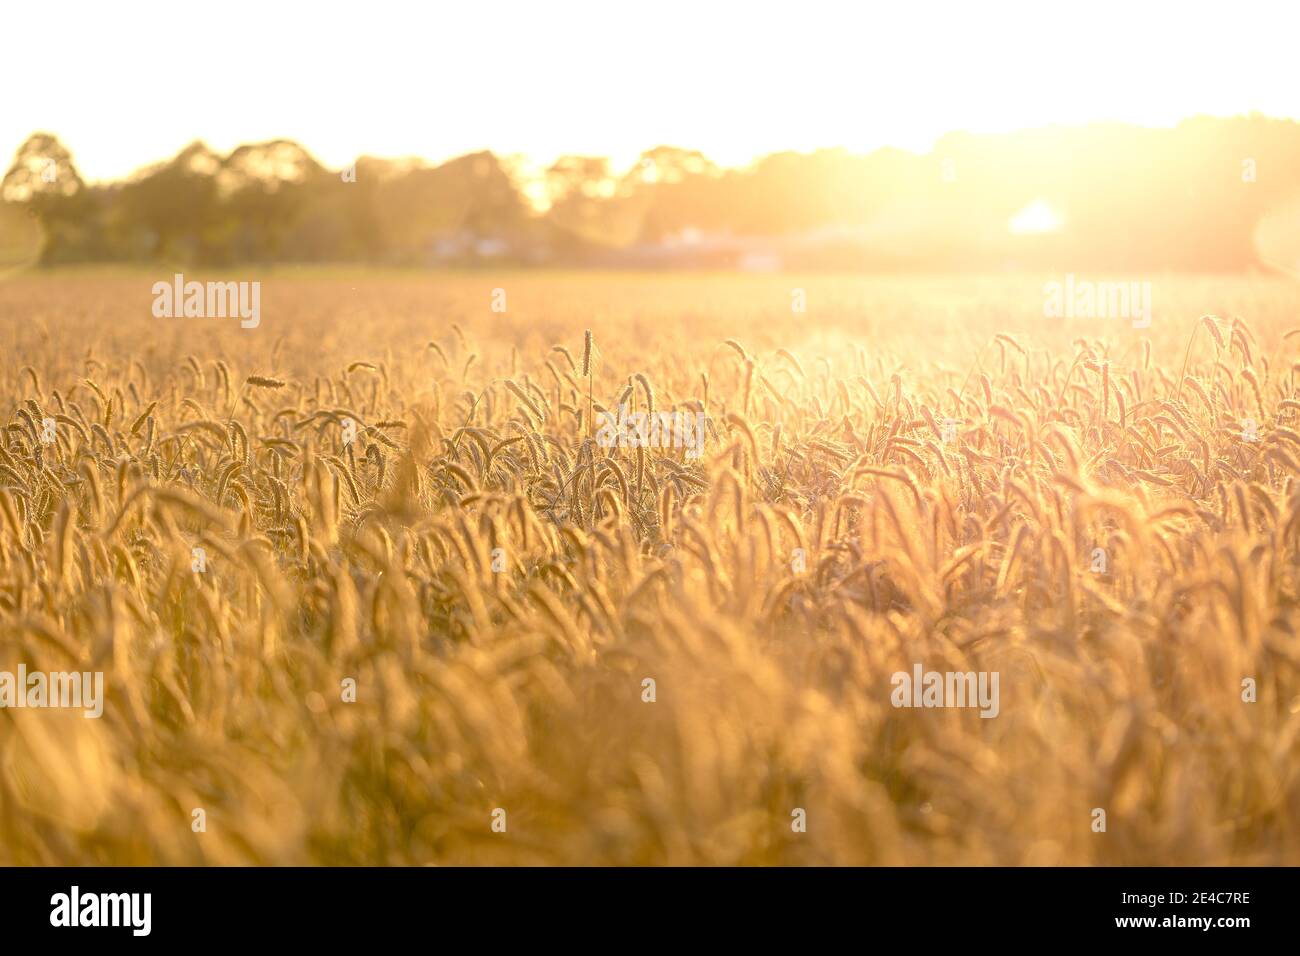 A grain field on a sunny day in eastfrisia, lokally named Ostfriesland Stock Photo